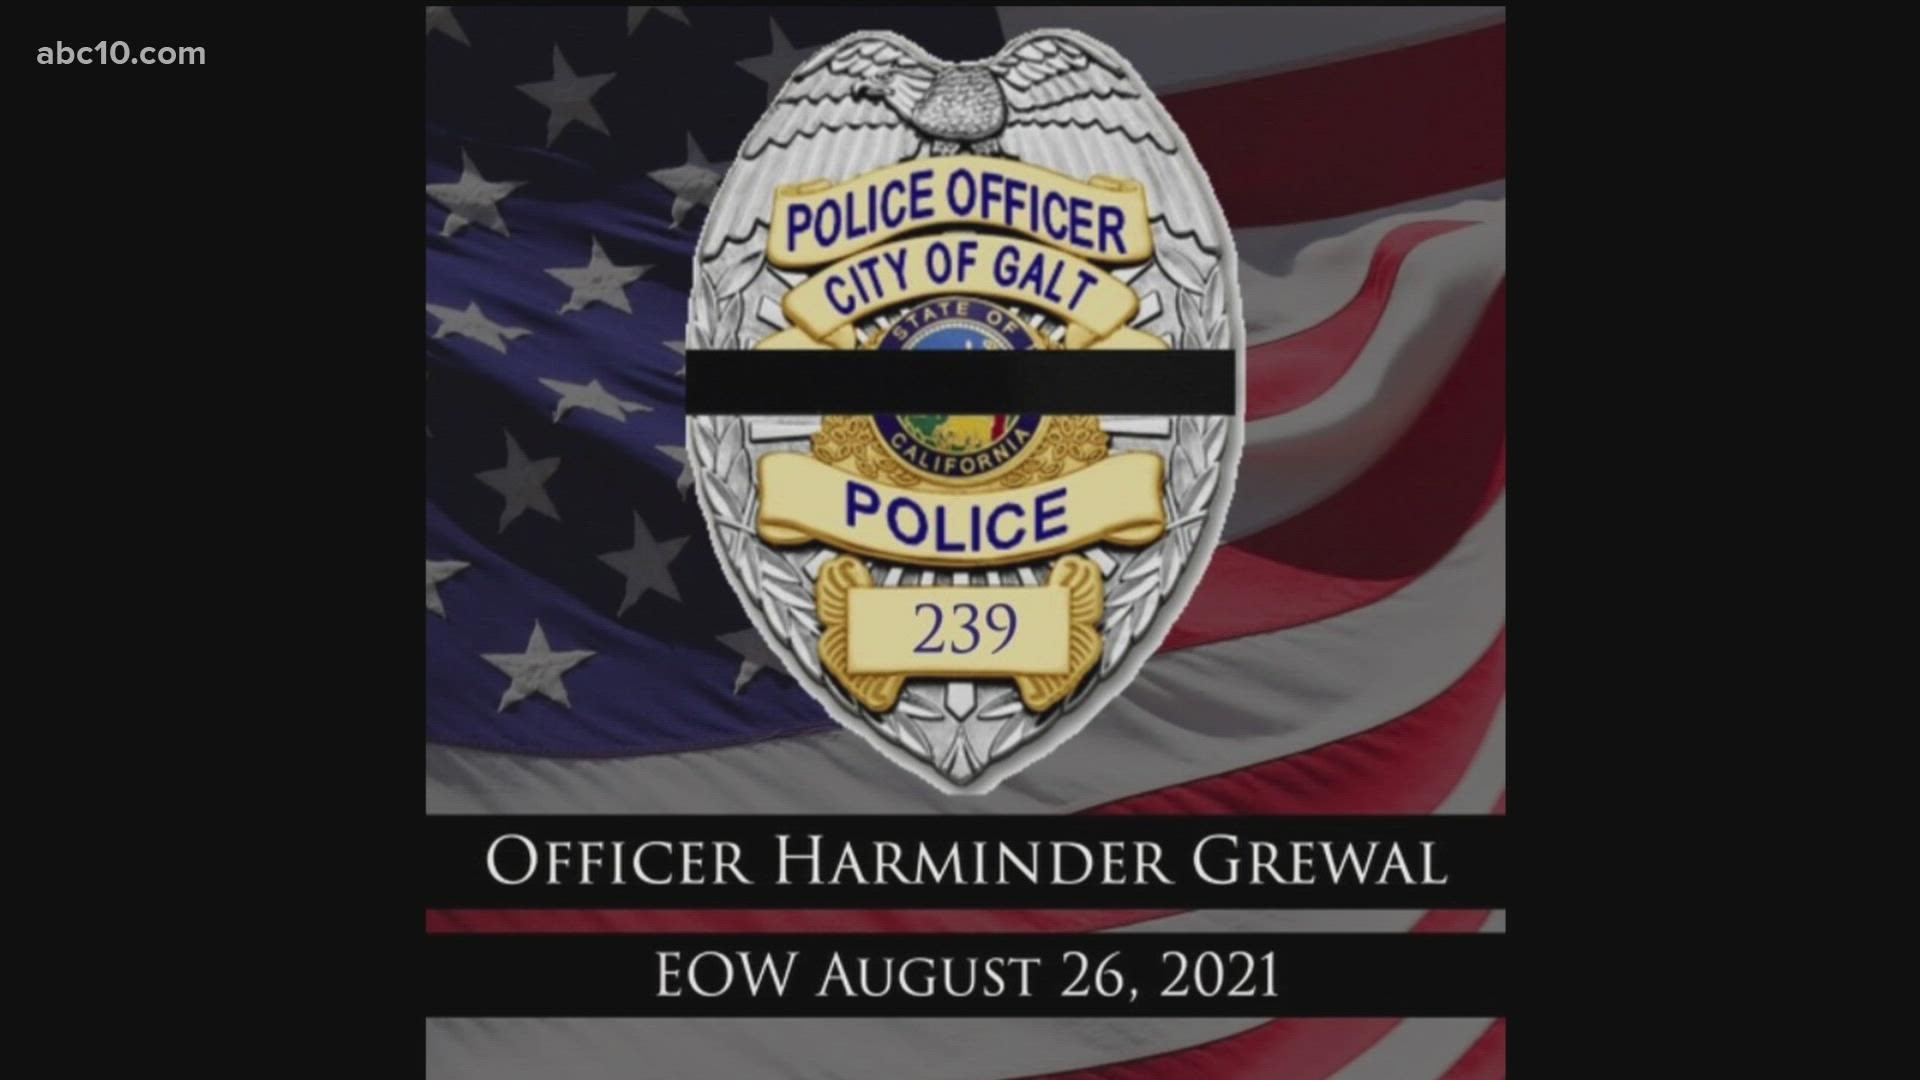 Listen to the end of watch radio call for Galt Police Officer Harminder Grewal.